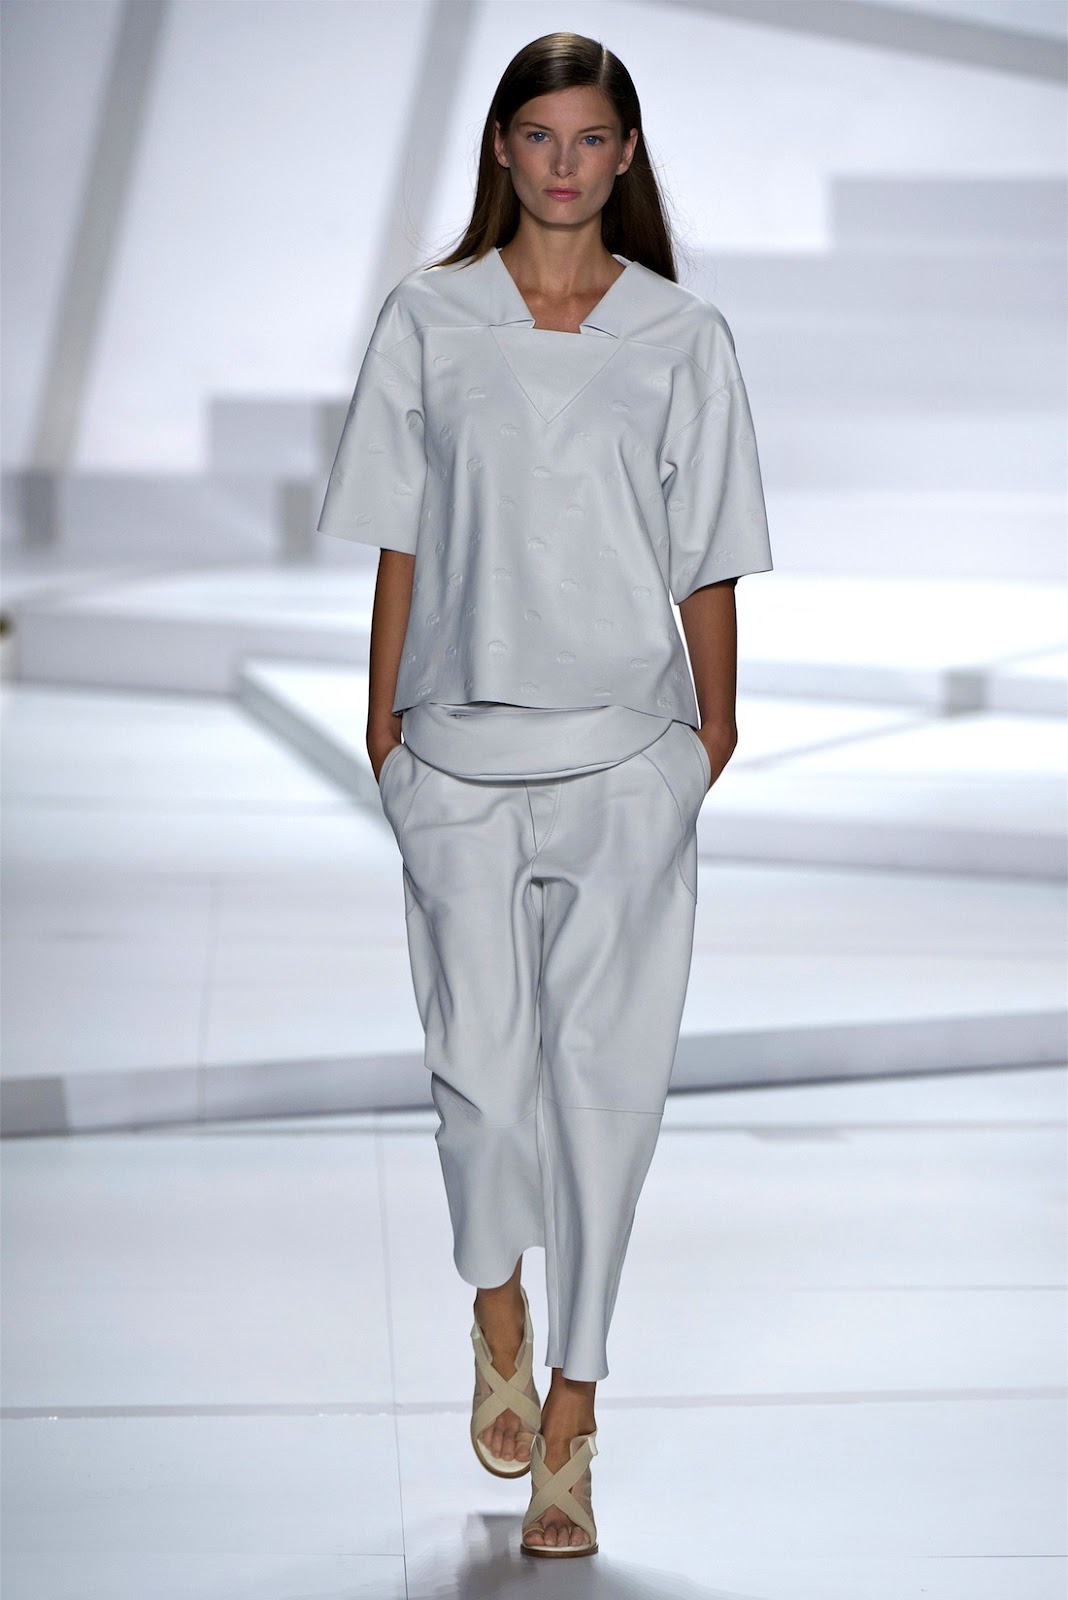 lacoste s/s 13 new york | visual optimism; fashion editorials, shows ...